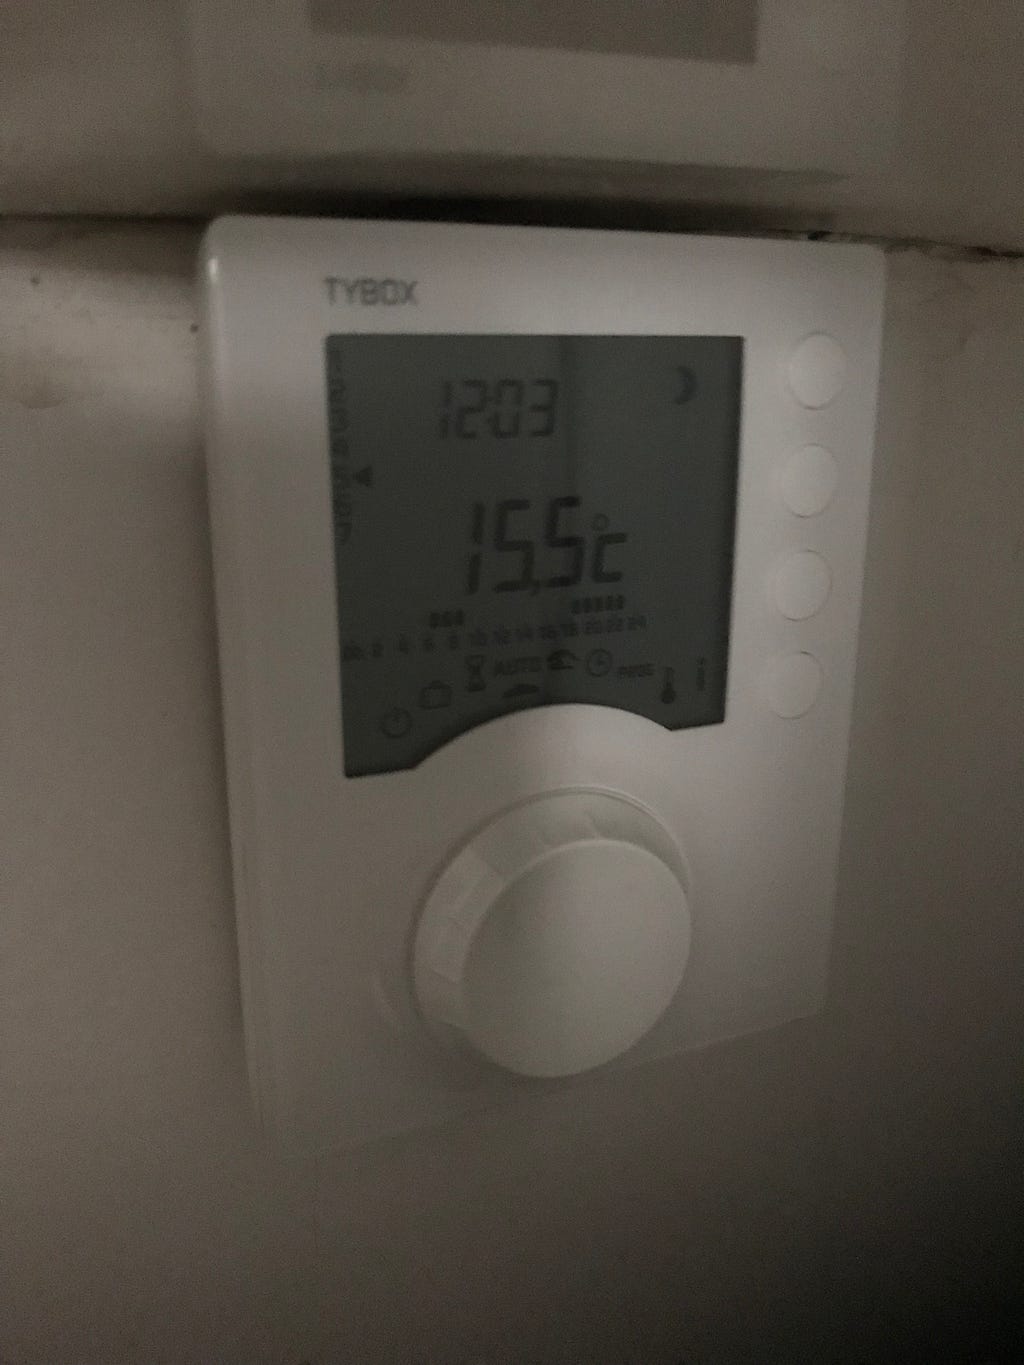 Thermostat to mitigate your temperature around the house